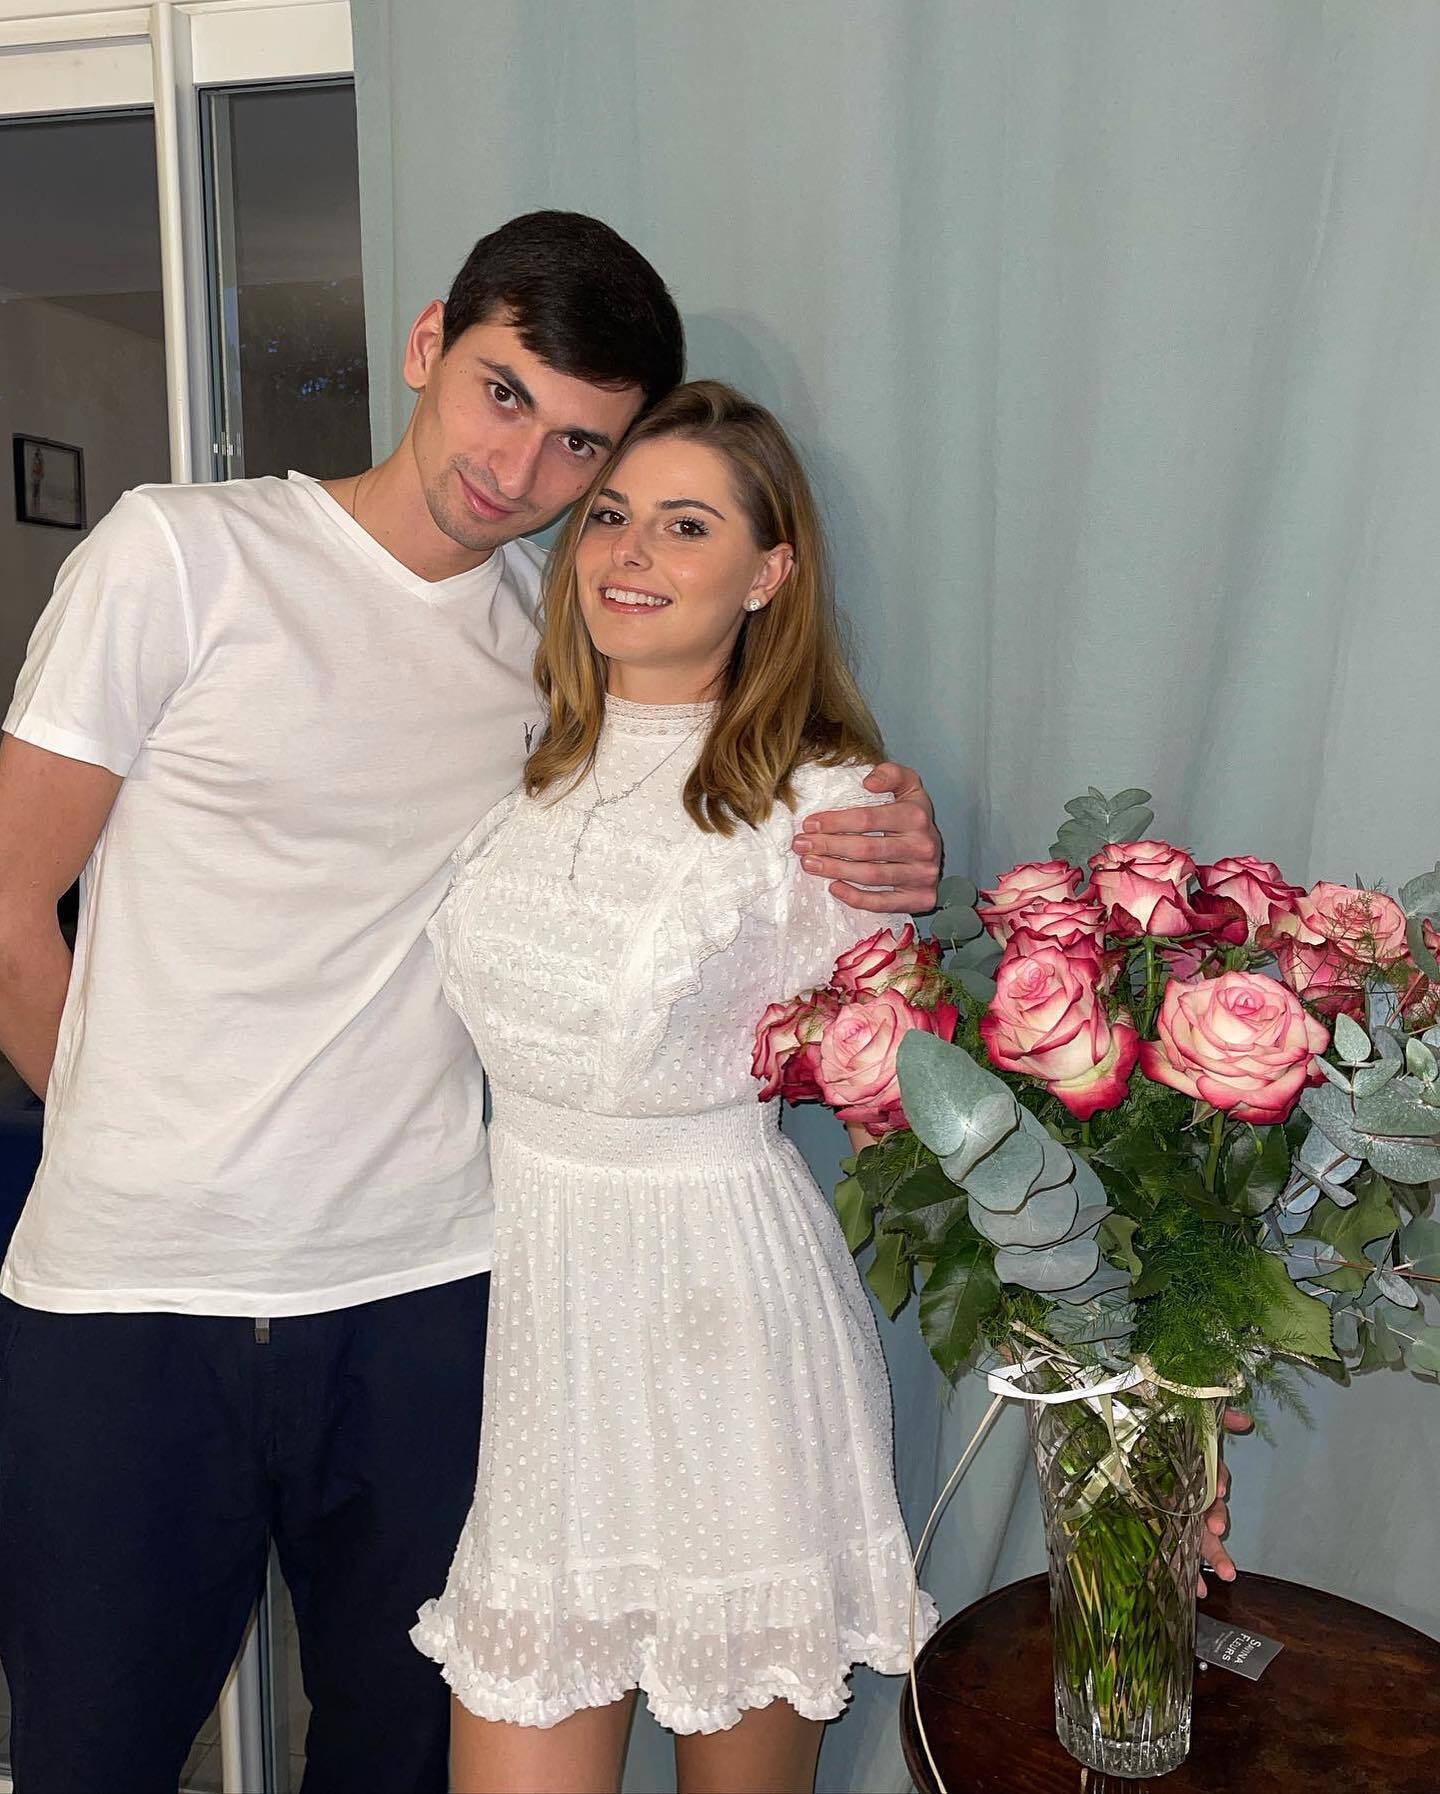 Ukrainian champion got engaged with a Russian tennis player. Photo